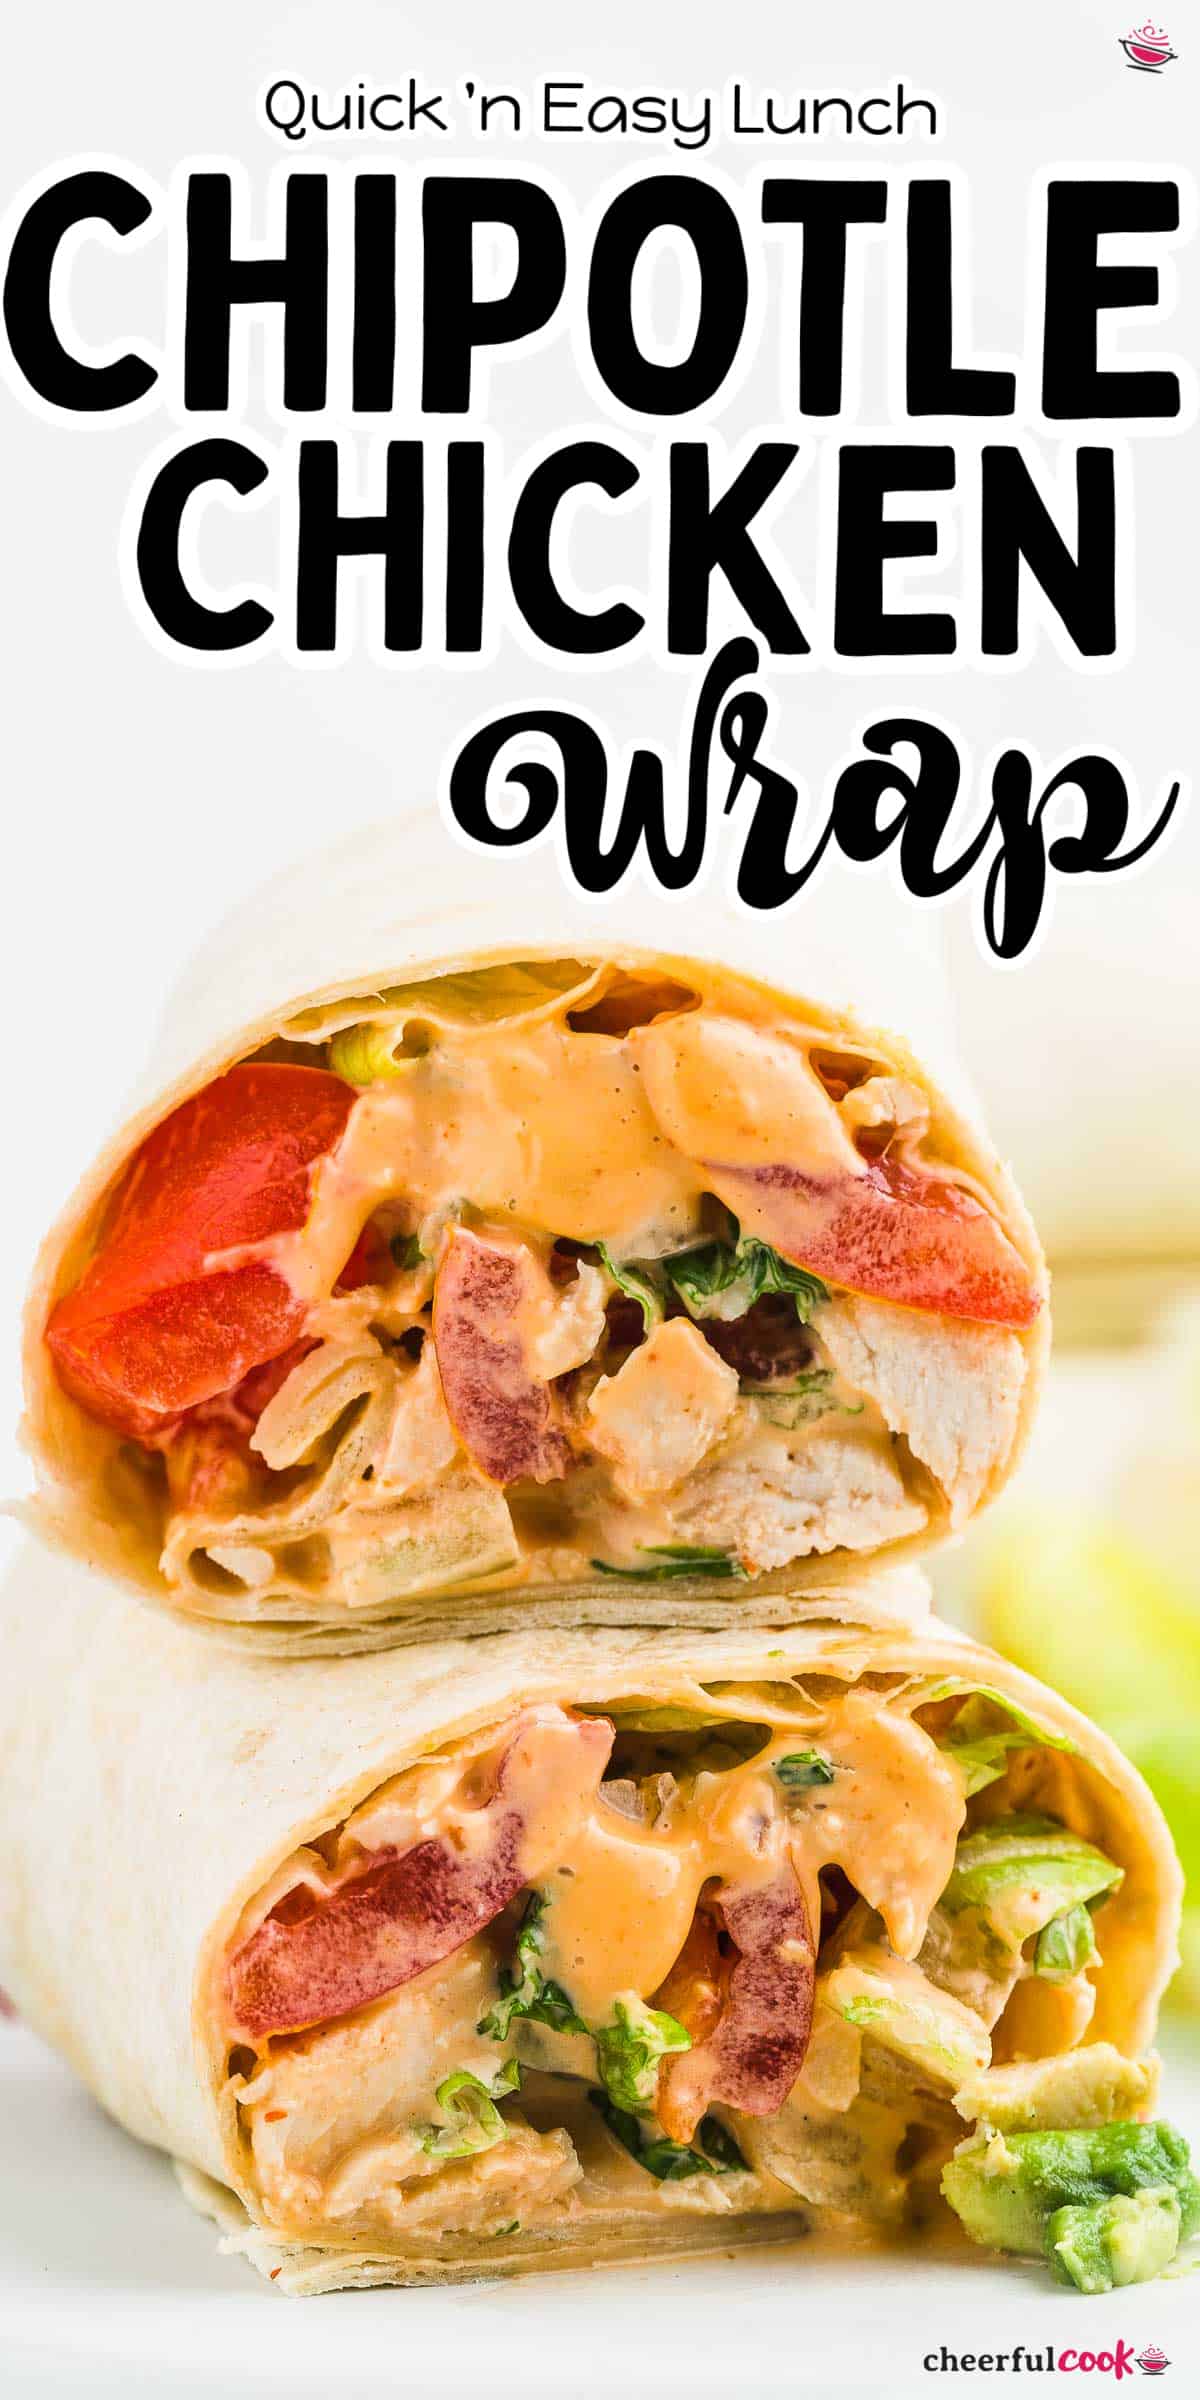 This Chipotle Chicken Wrap recipe is easy to make and tastes like you're eating at a restaurant! Packed with chicken, tomato, and avocado, it's perfect for a quick and healthy lunch. #cheerfulcook #chickenwrap #chiptole #chiptolechicken #lunch #recipe #easy via @cheerfulcook